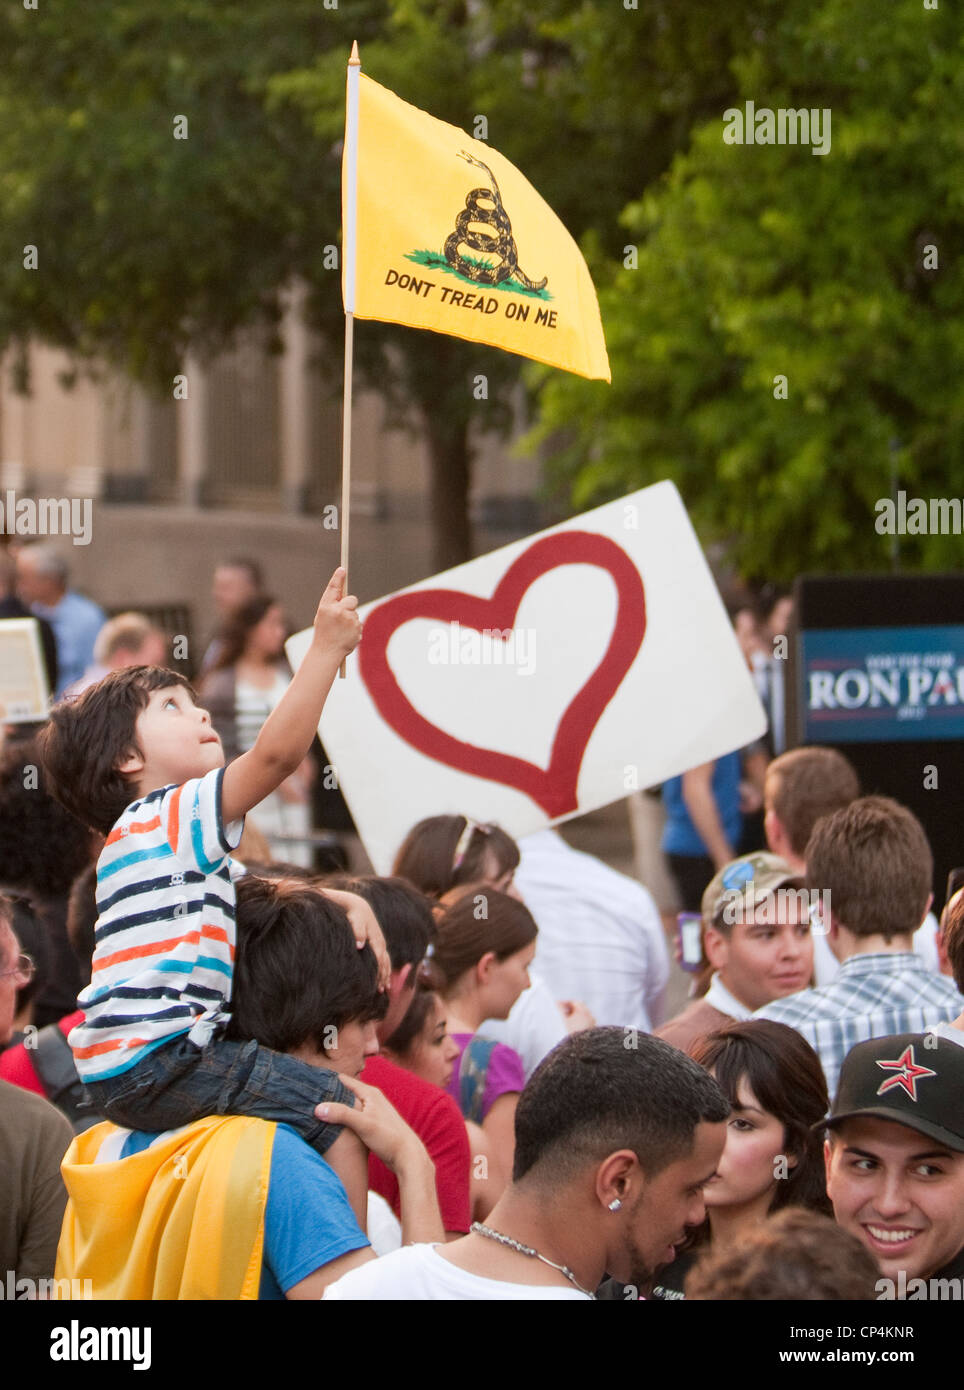 young boy holds Don't Tread on Me flag at Ron Paul rally in San Antonio, Texas Stock Photo